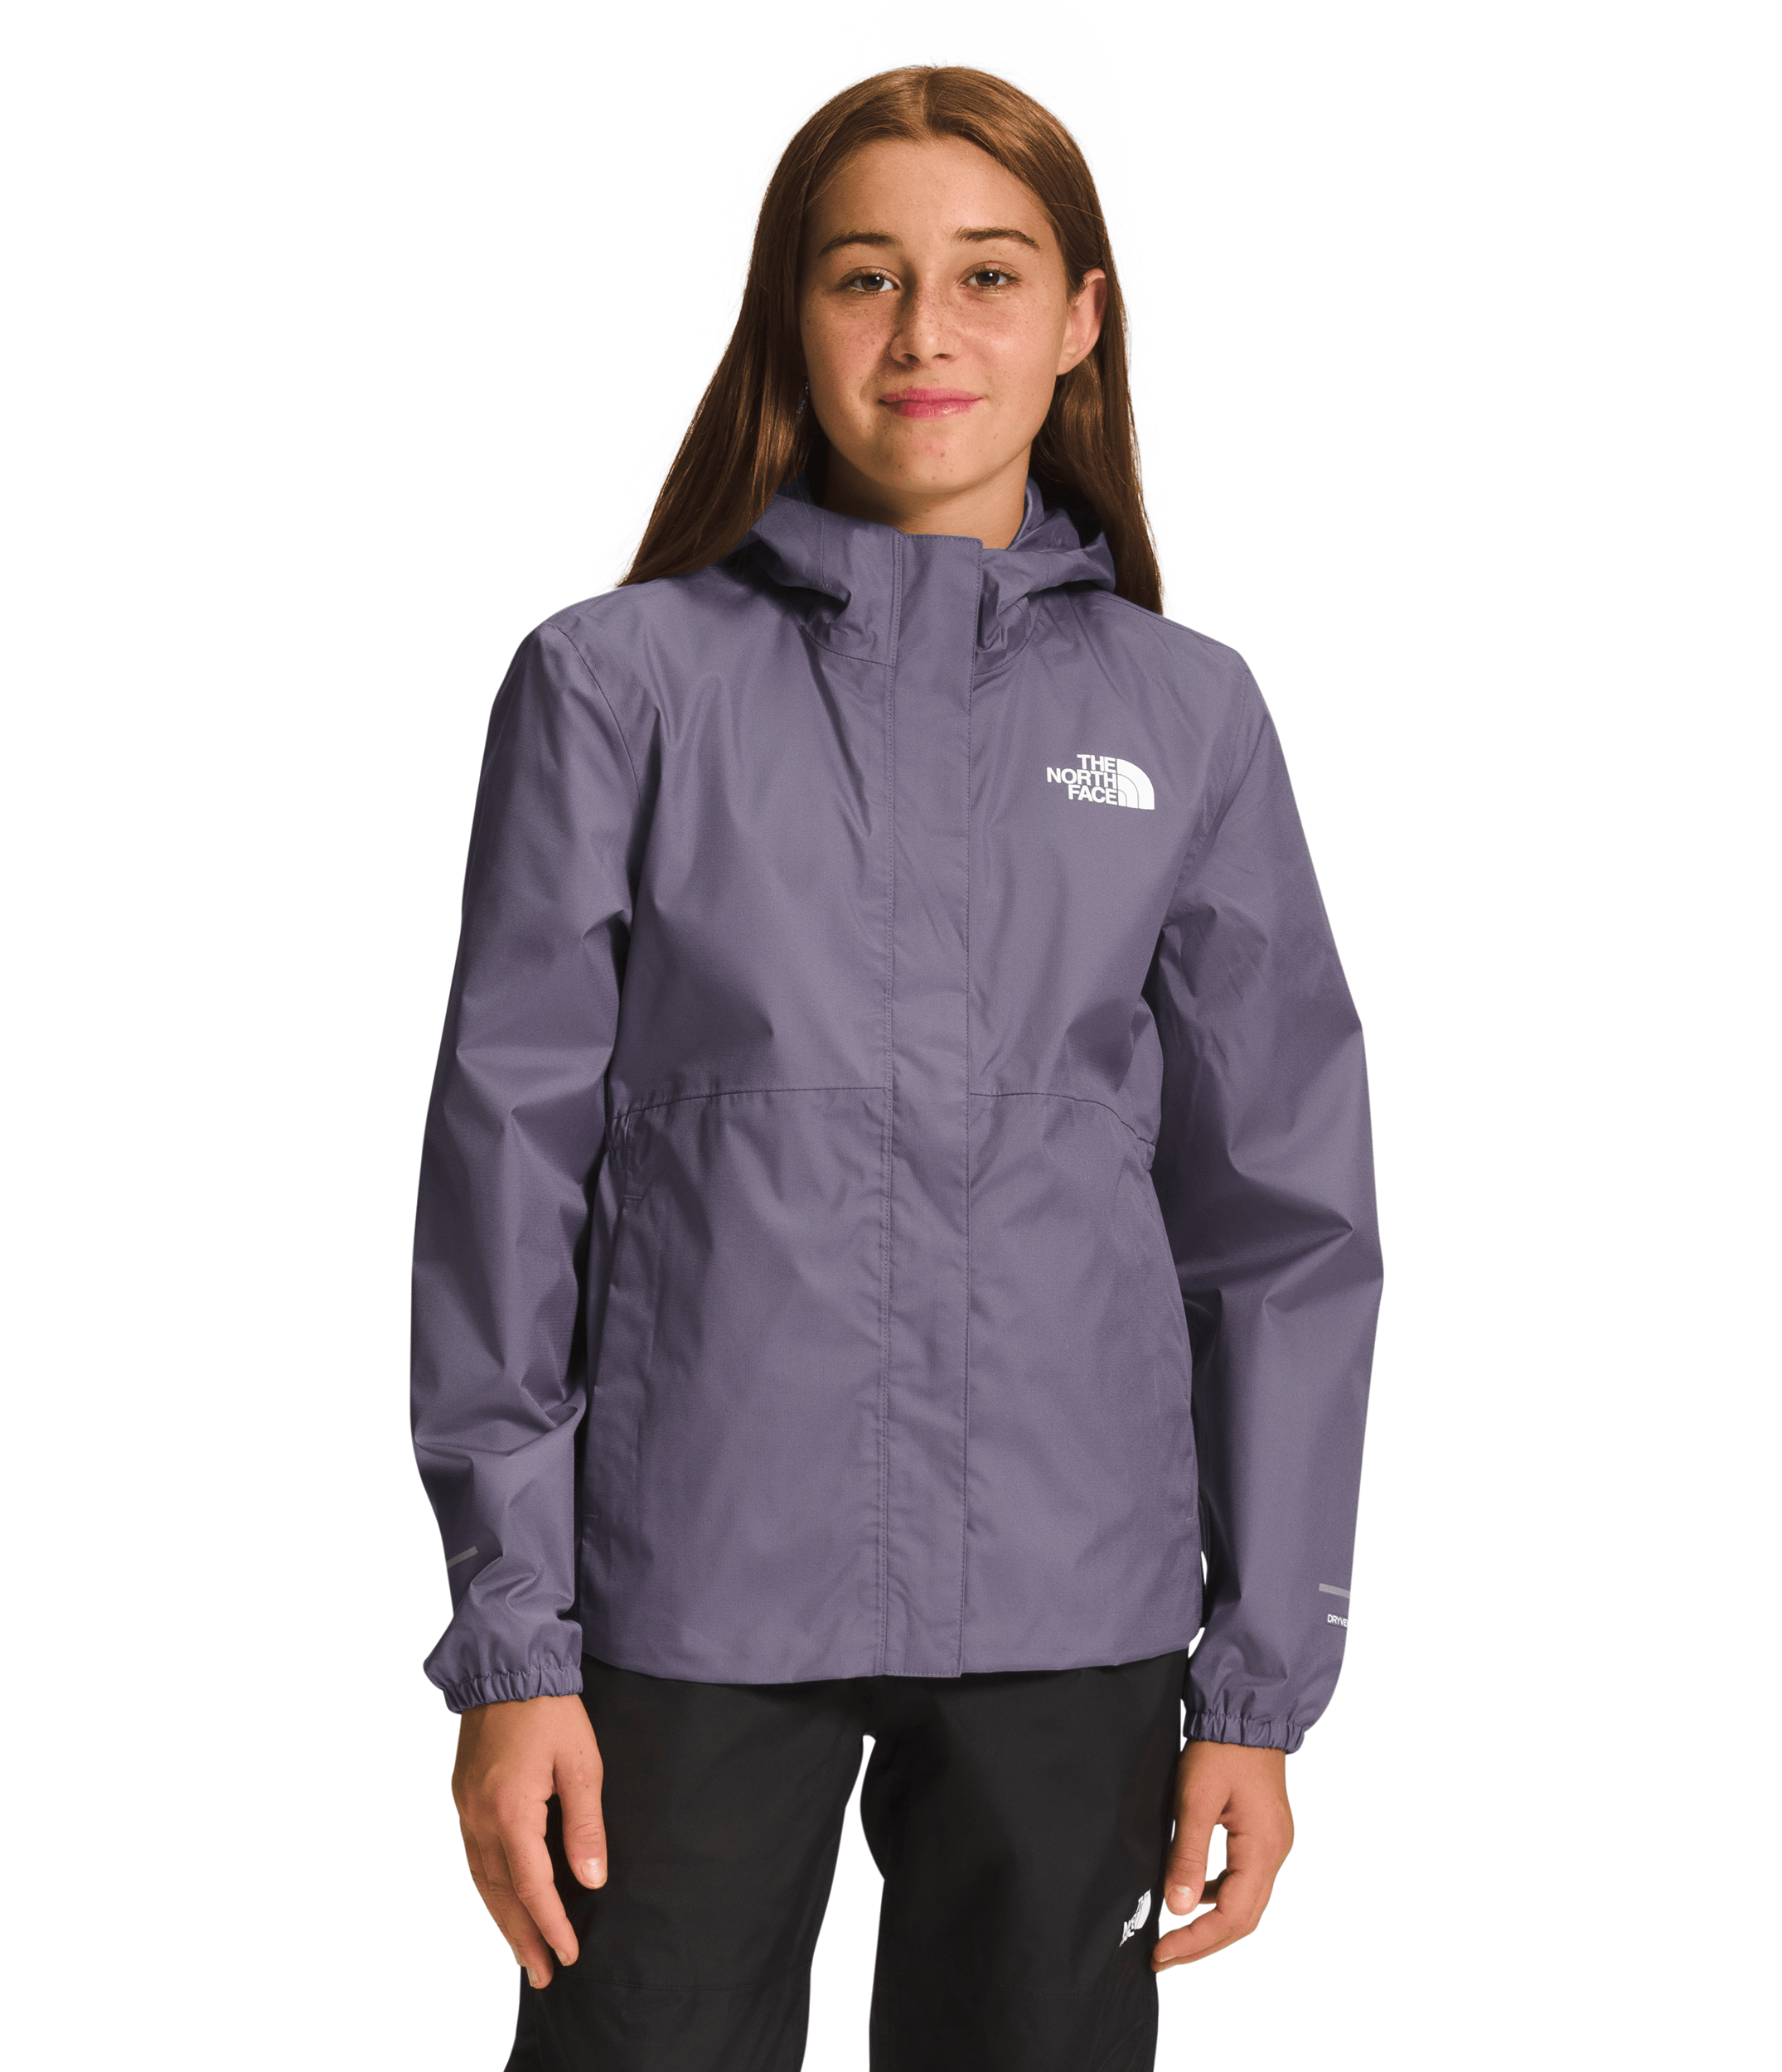 Smiling girl wearing Lunar Slate The North Face Girls' Warm Storm Jacket - Mountain Kids Outfitters: Stylish and Weather-Ready Outerwear